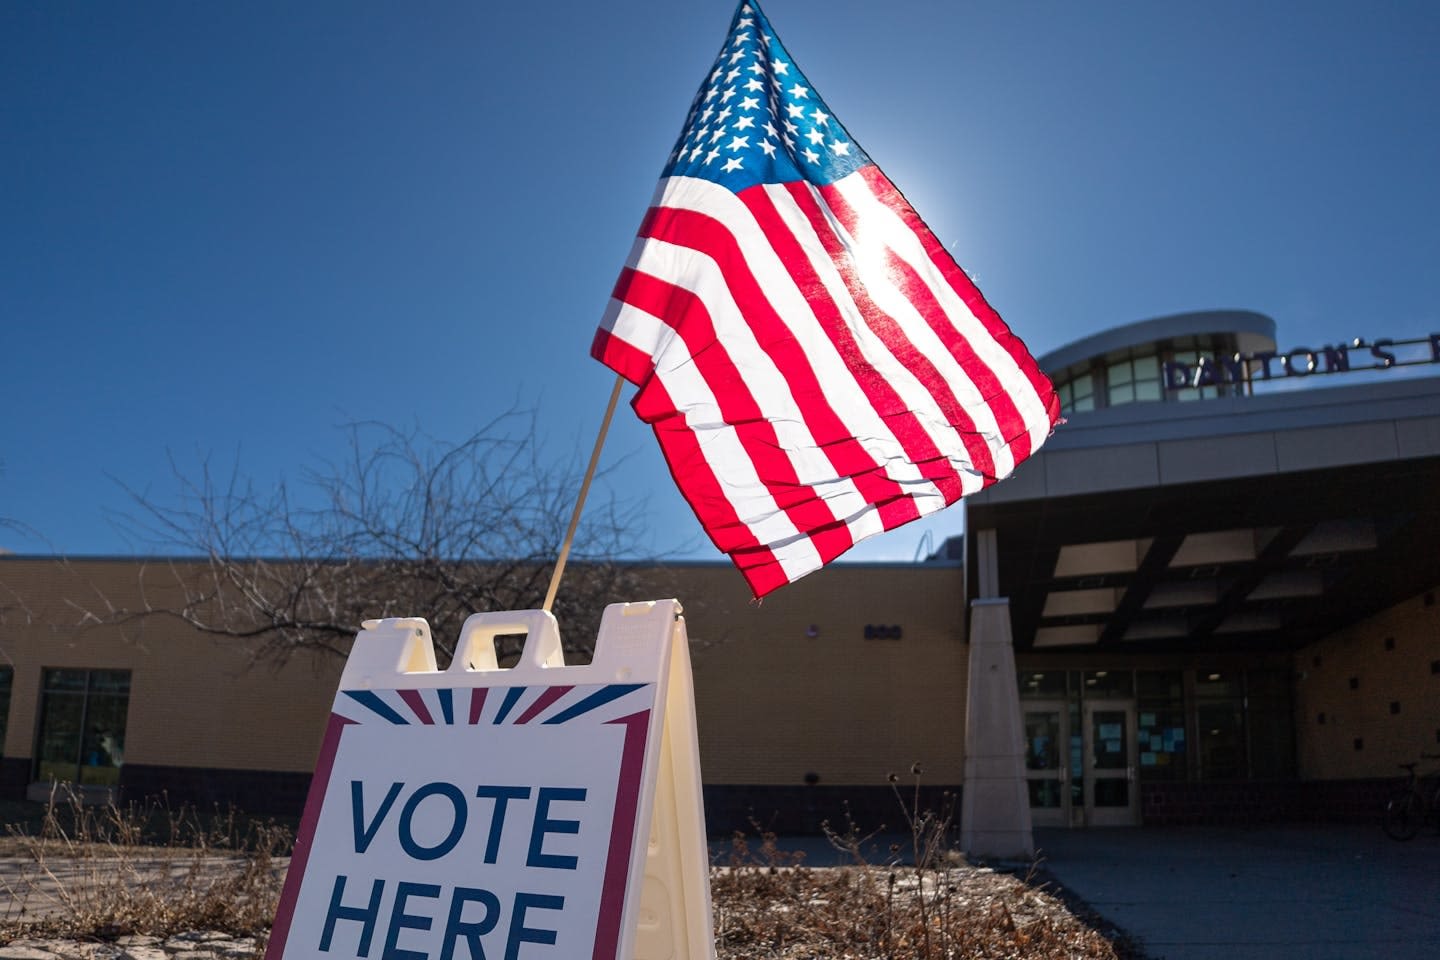 Minnesota's primary elections are two weeks away. Here are four key races to watch.